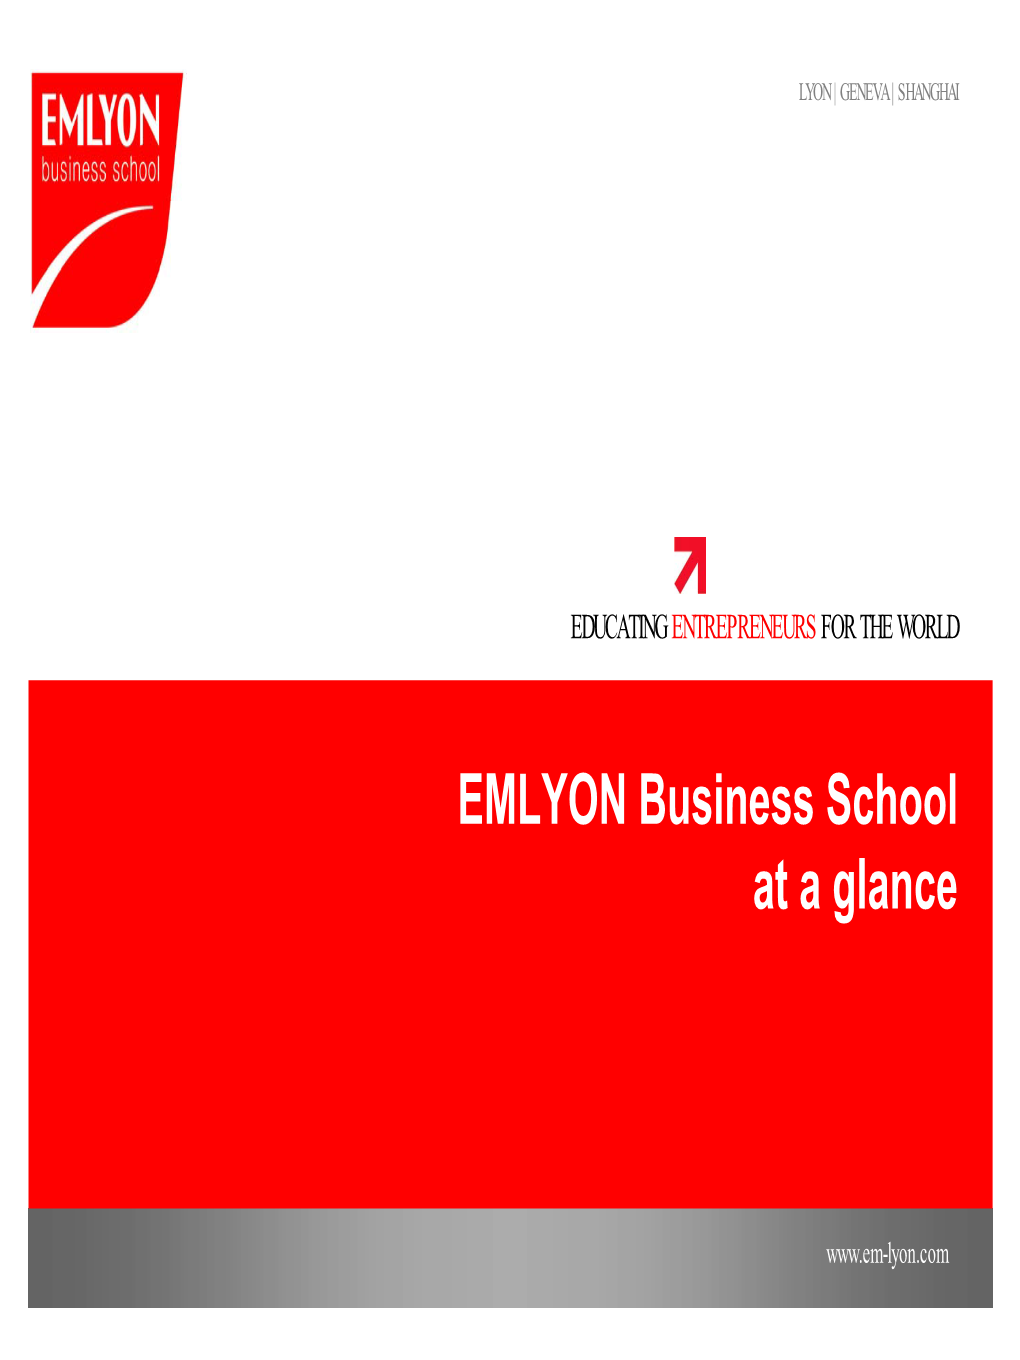 EMLYON Business School at a Glance